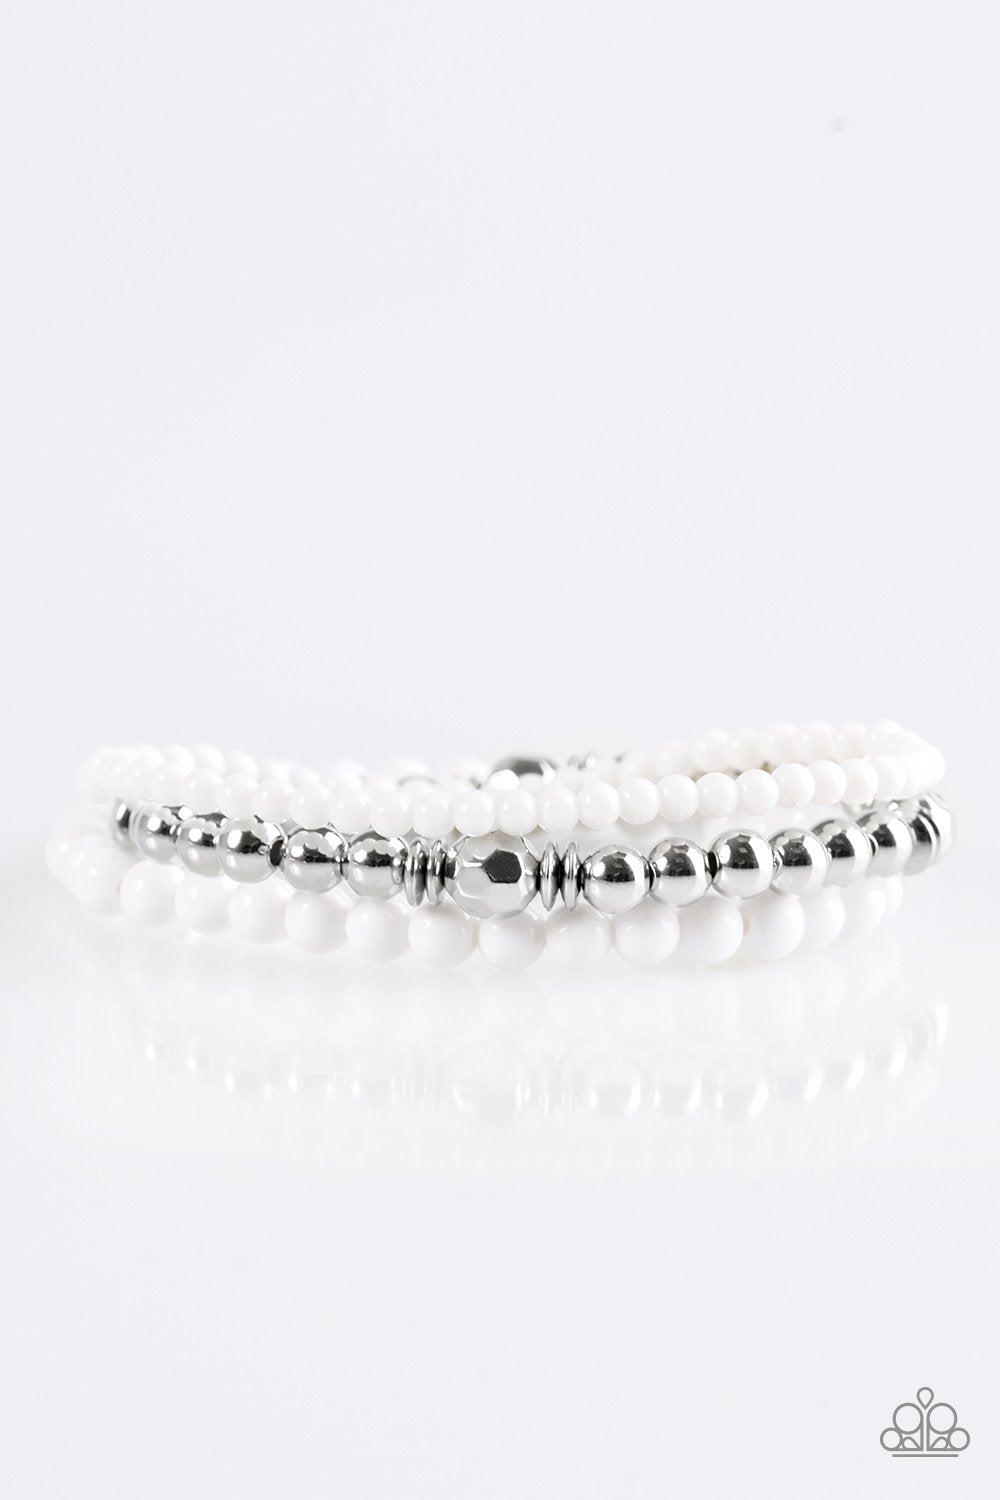 Midsummer Marvel White and Silver Stretch Bracelet Set - Paparazzi Accessories-CarasShop.com - $5 Jewelry by Cara Jewels